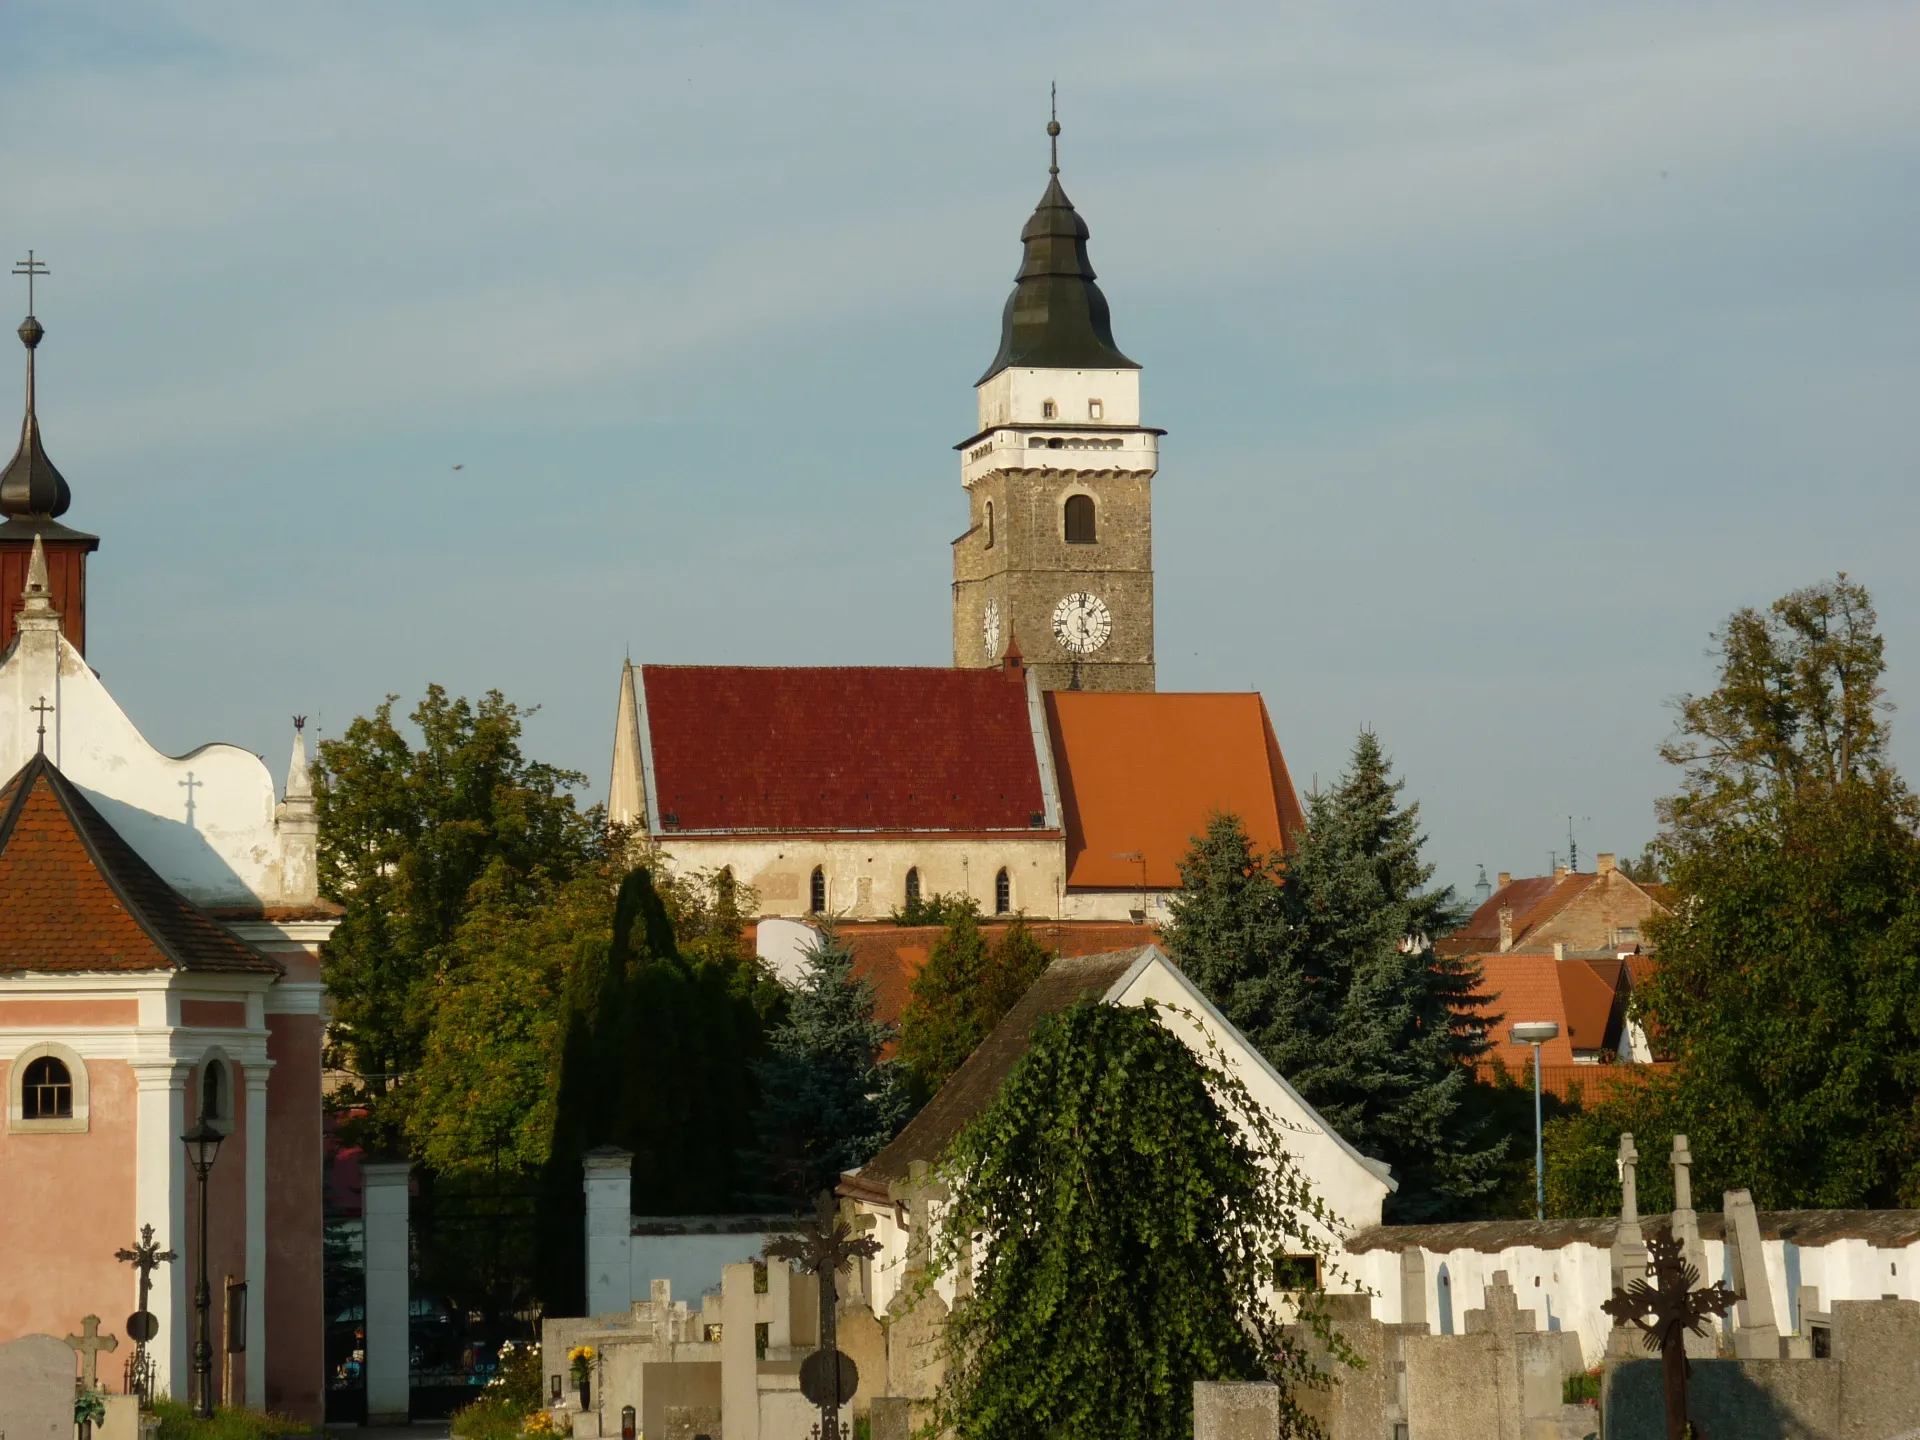 Image of Slavonice